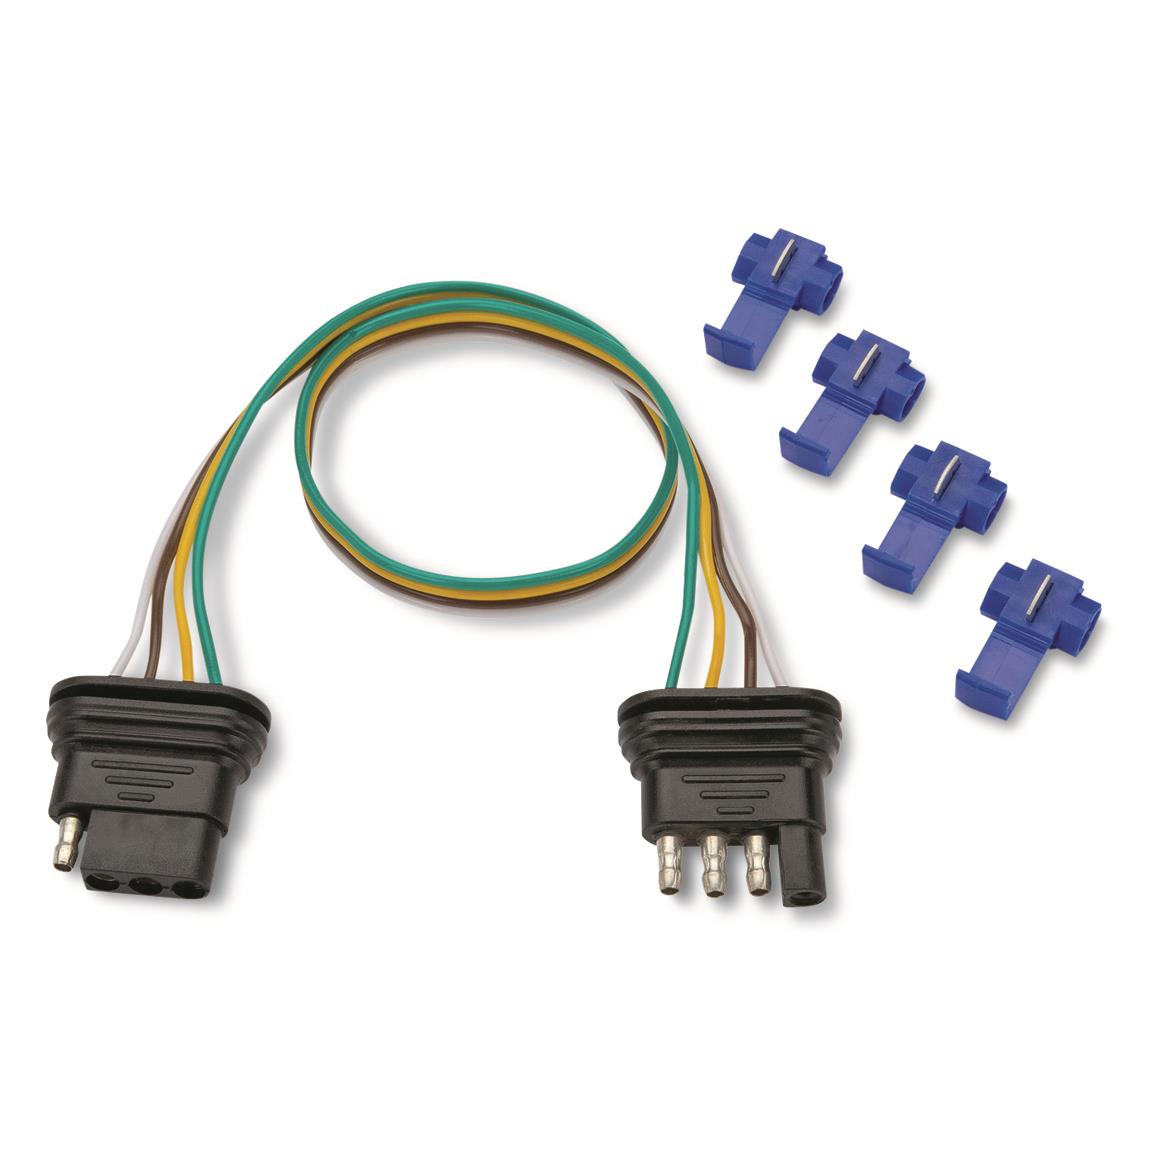 TowSmart 4-Way Flat Trailer Light Wiring Kit with Splice Connectors, 18"